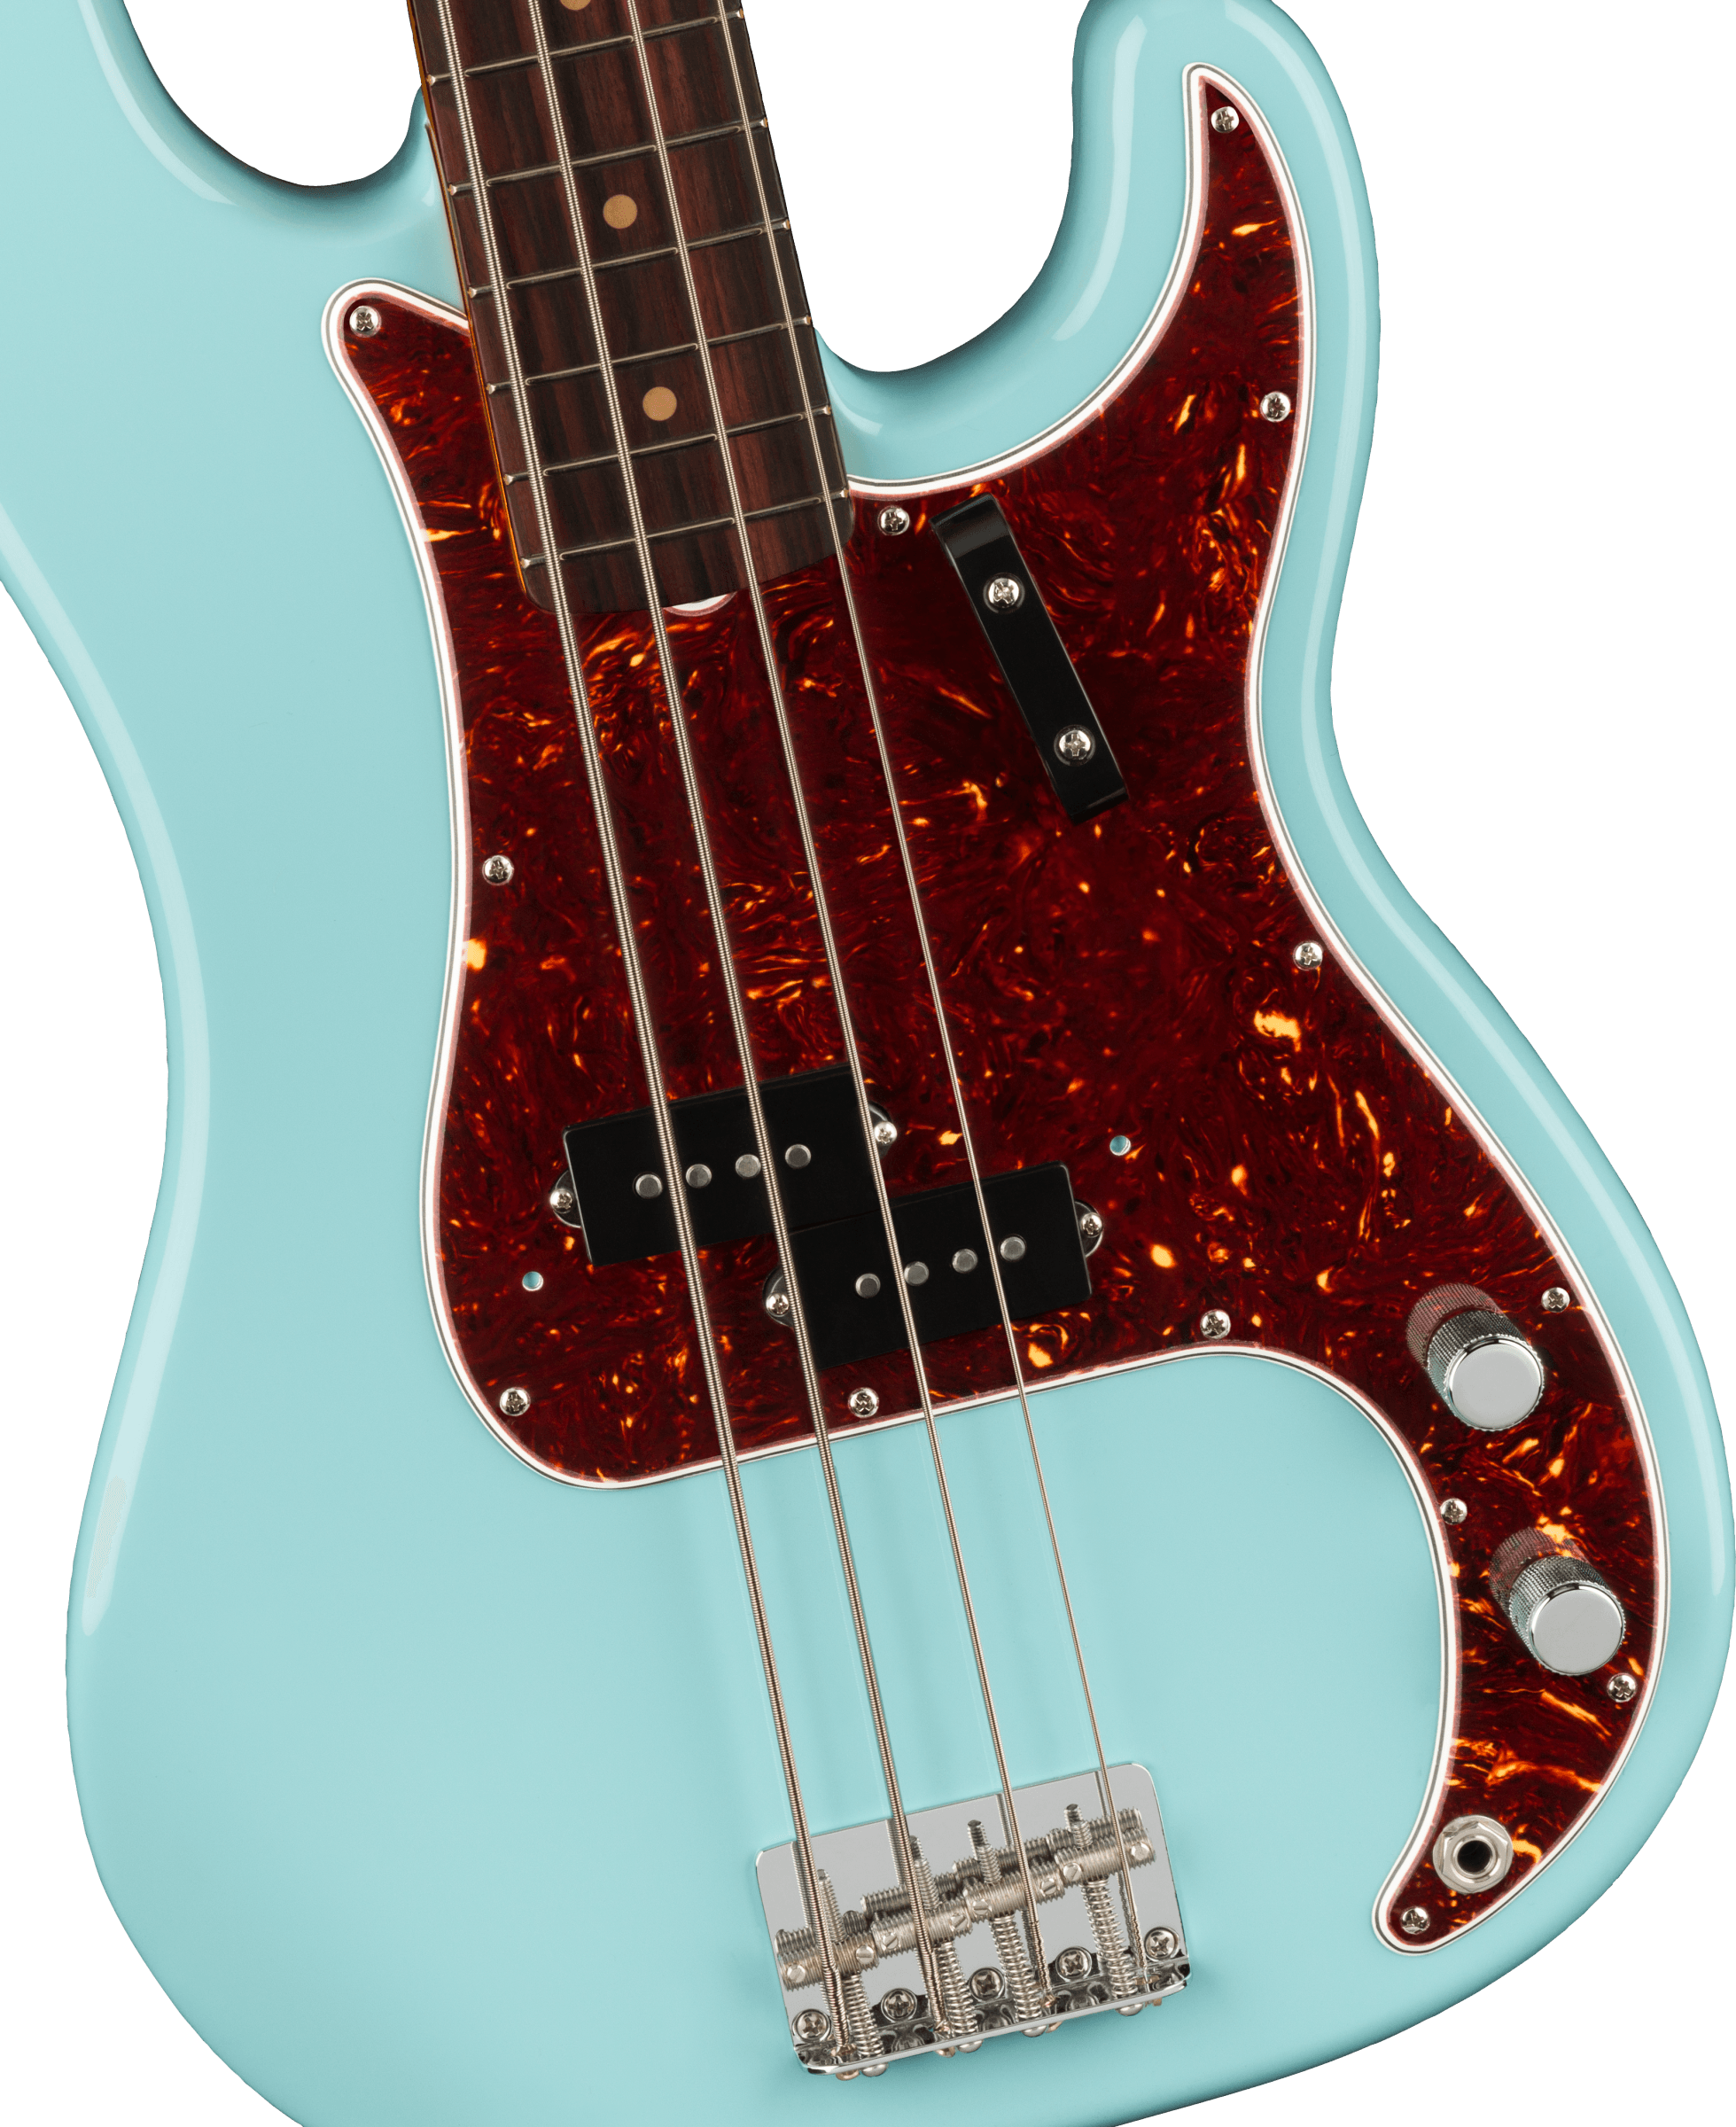 American Vintage II 1960 Precision Bass®, Rosewood Fingerboard, Daphne Blue (Limited)